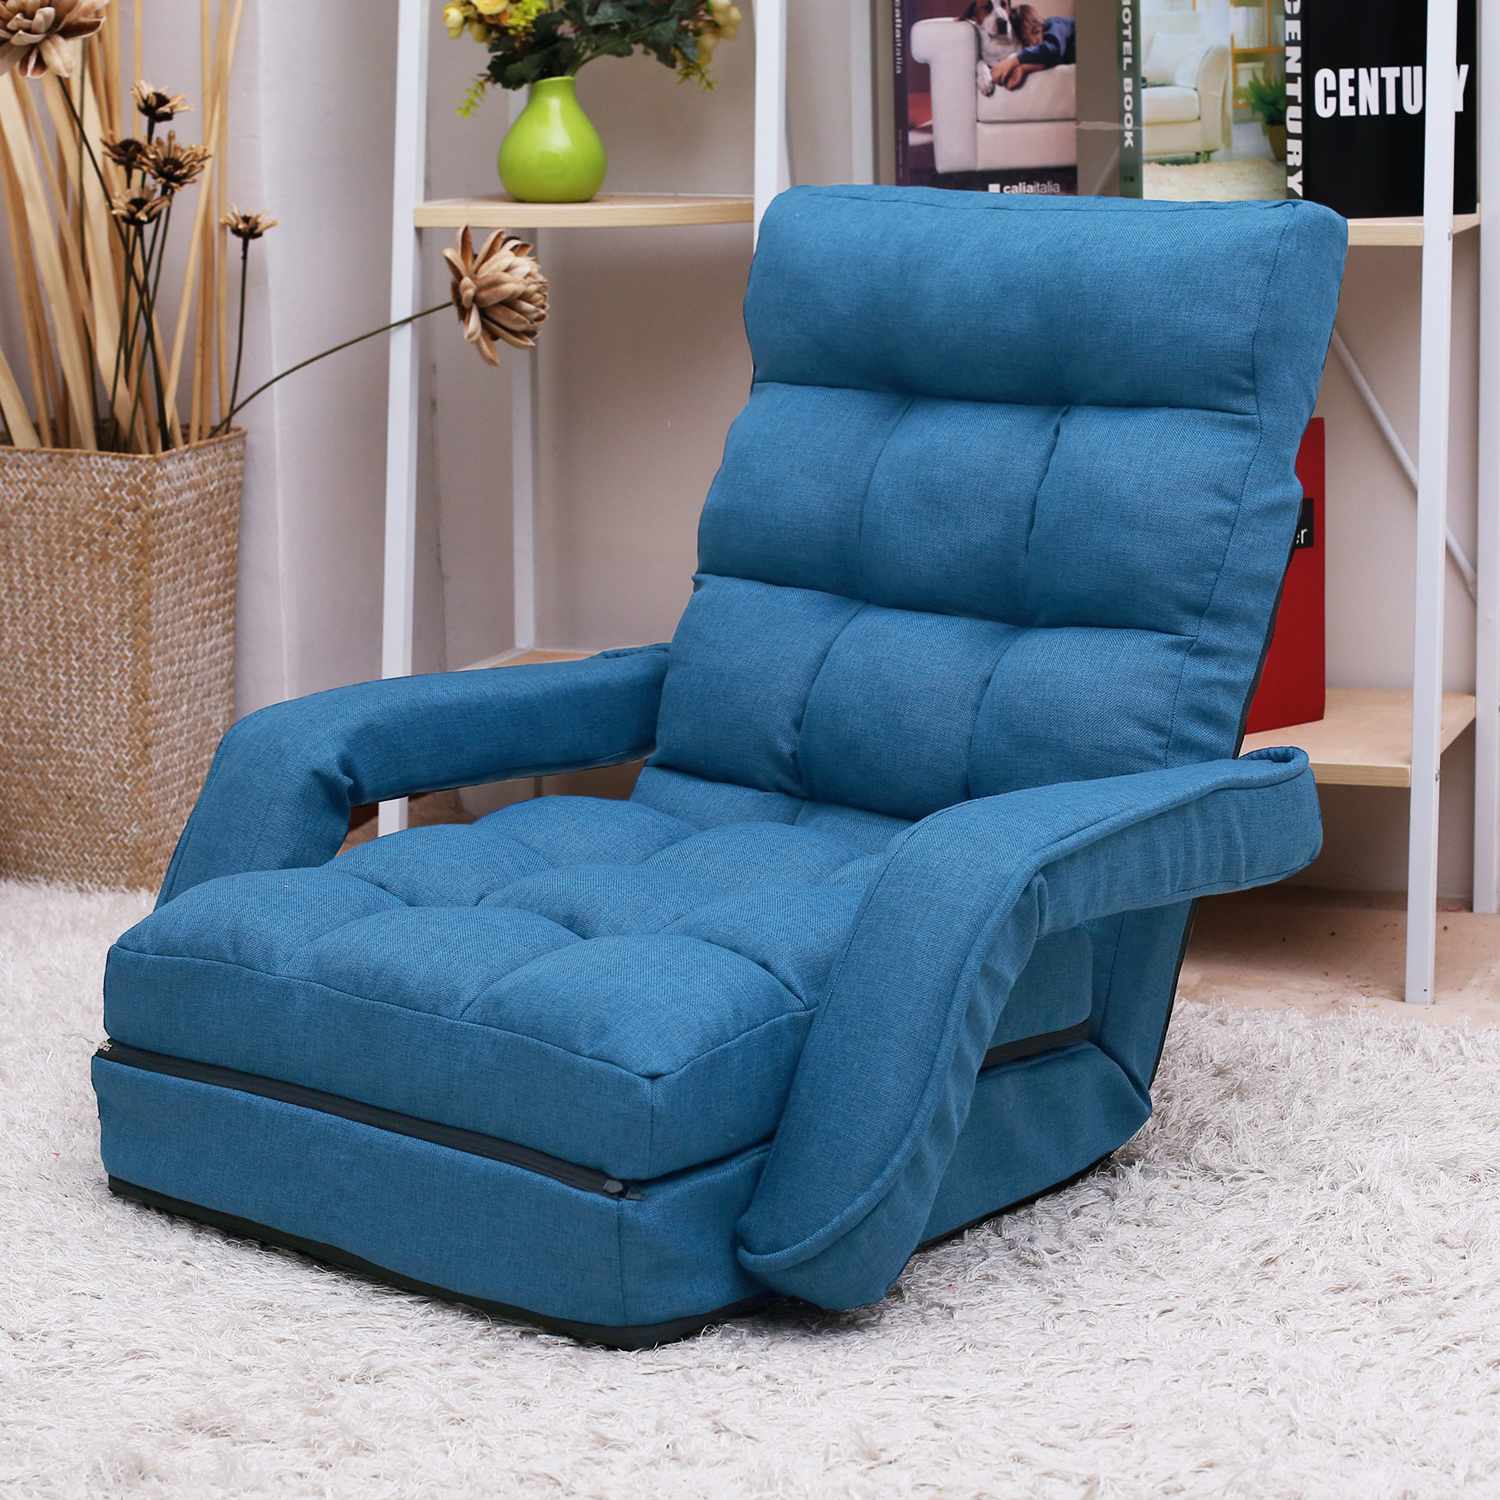 Lazy Sofa Floor Chair 5 Position Adjustable Lazy Floor Sofa Chair For Bedroom And Living Room (6)